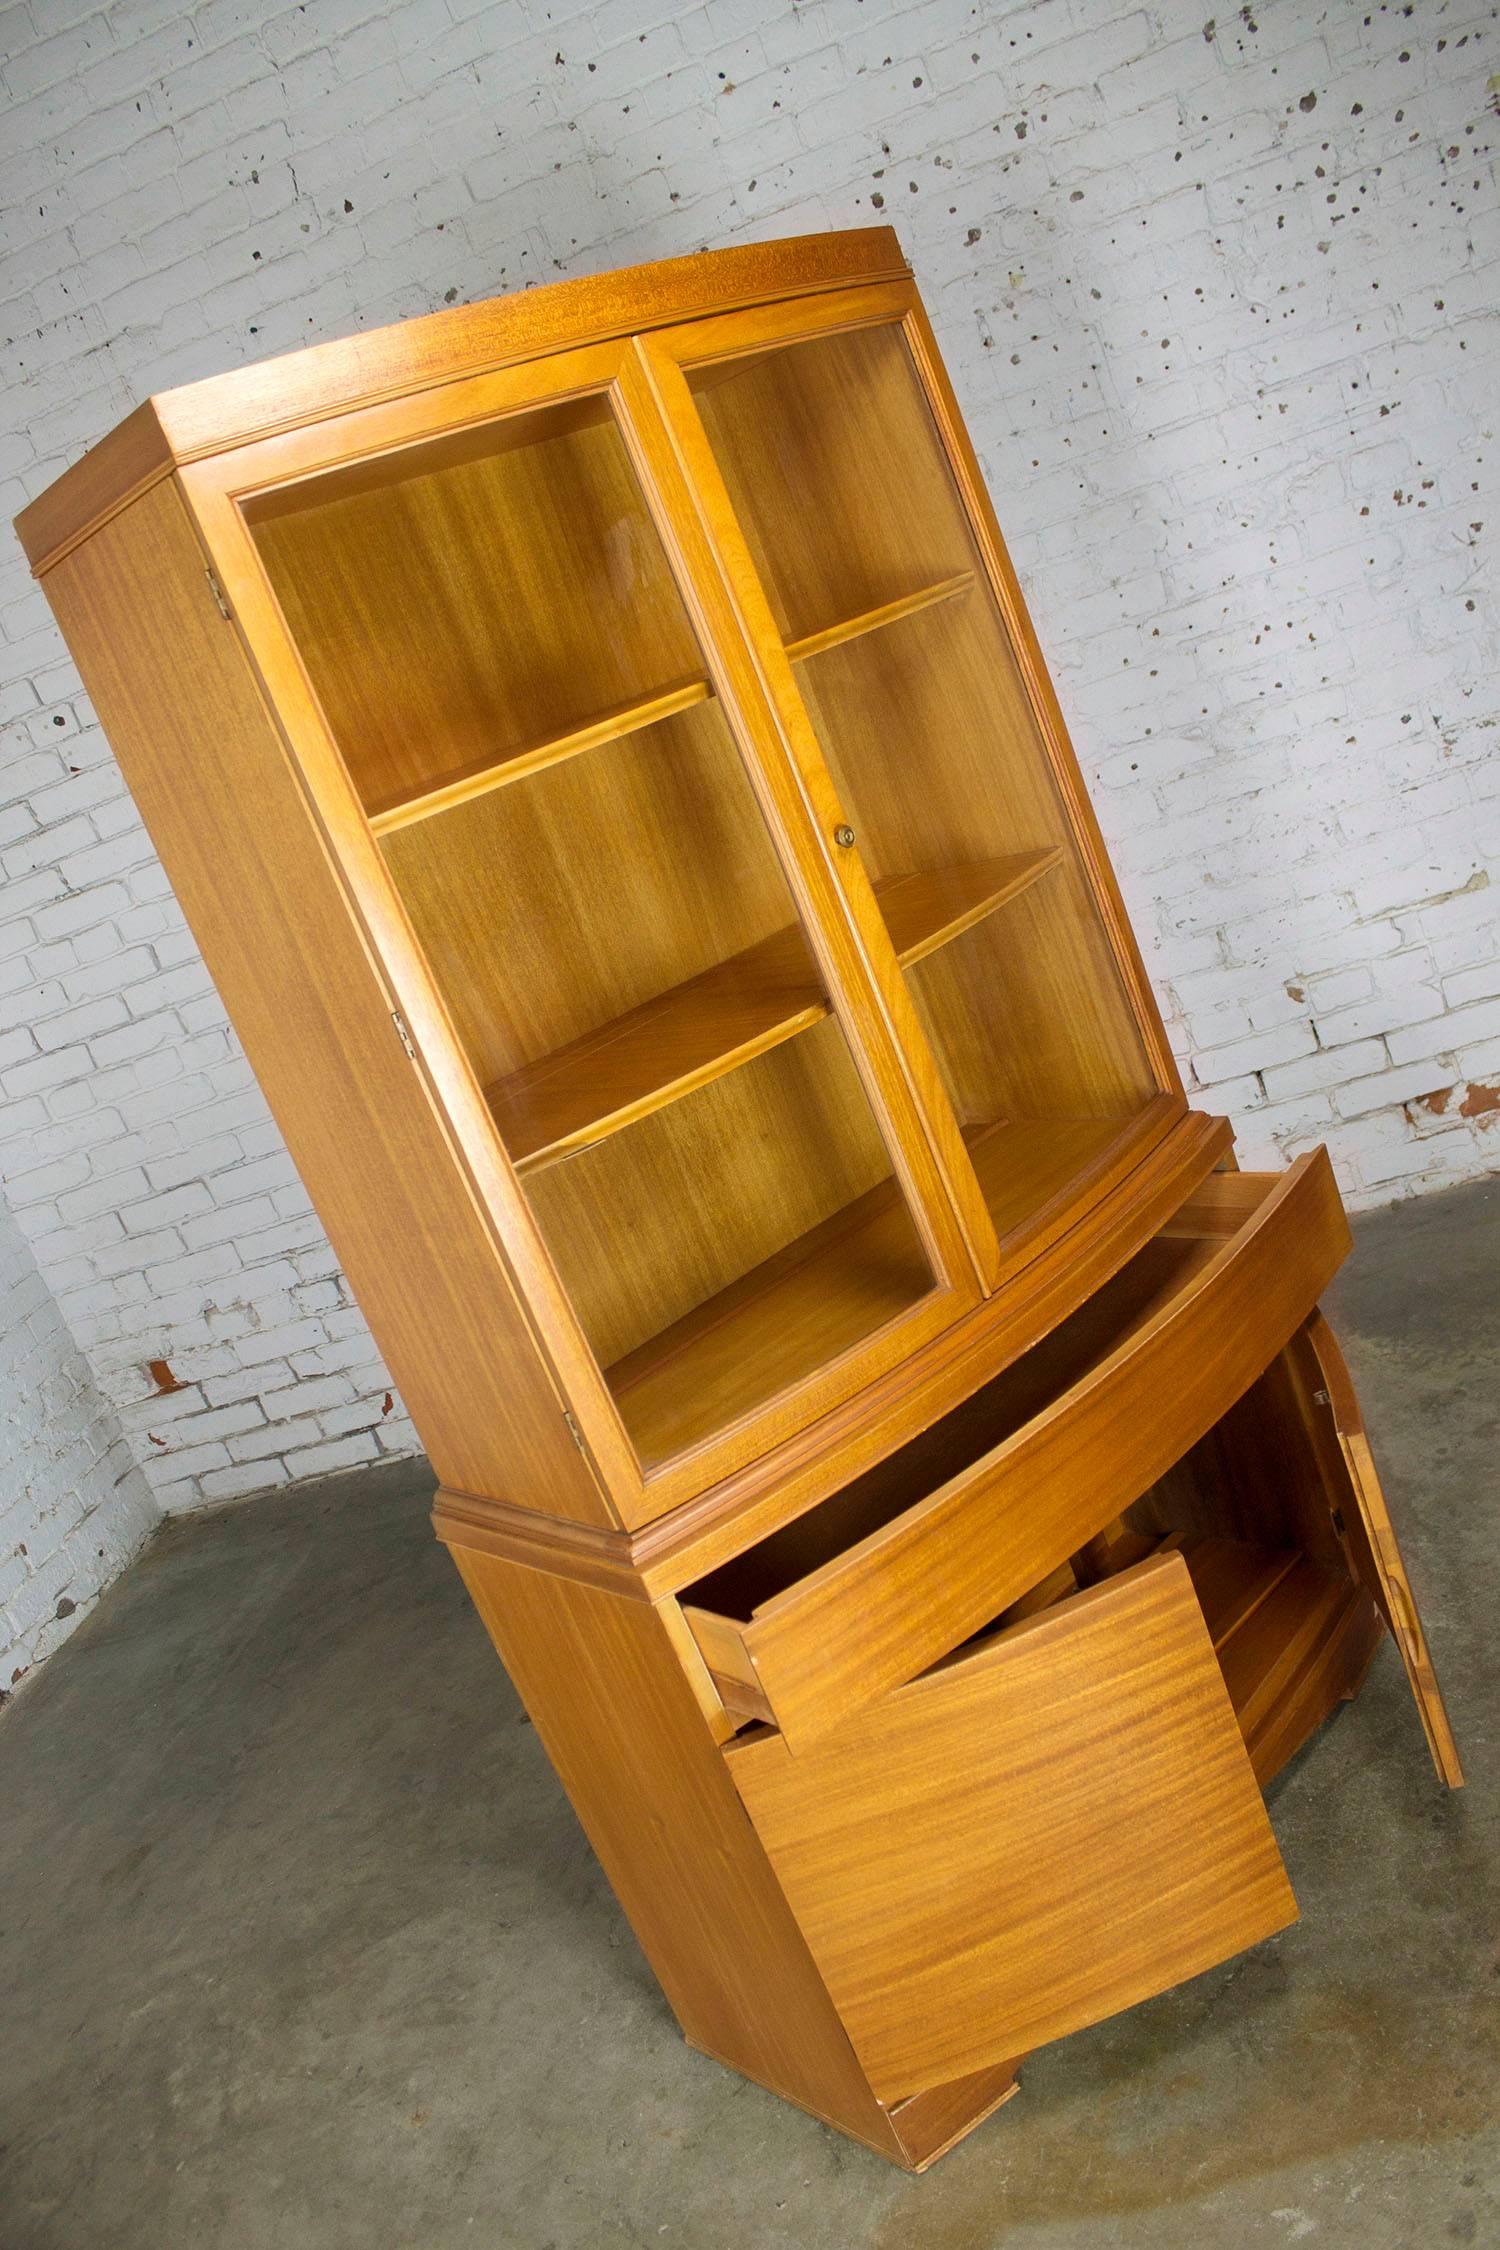 Gorgeous small but mighty Mid-Century Modern mahogany veneer china hutch cabinet. The maker is undetermined but not its great lines and wonderful quality construction. This cabinet is in very good vintage condition.

This vintage Mid-Century